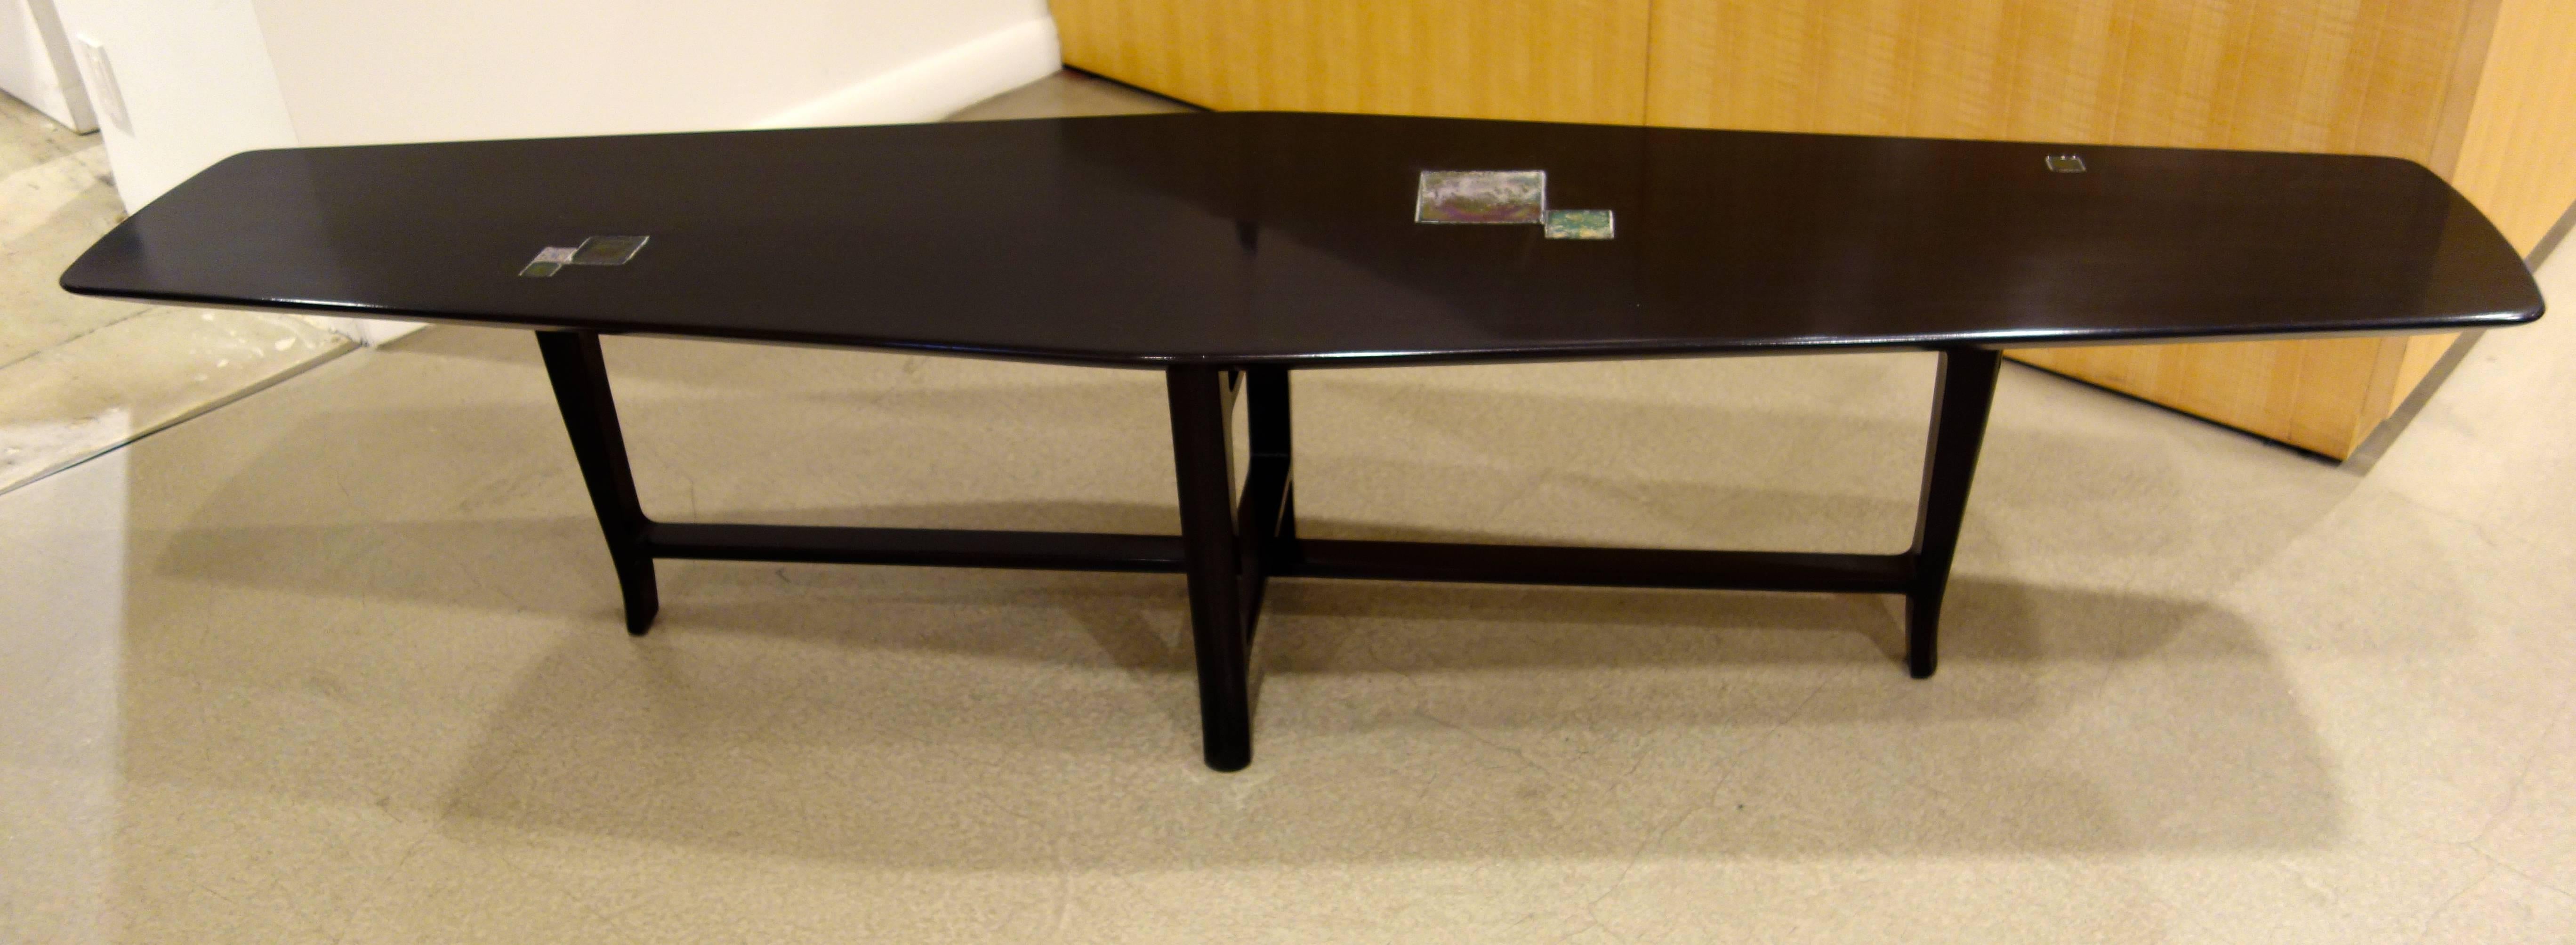 A Mid-Century Modern coffee table by Edward Wormley for Dunbar's 1957 Janus collection, model 5623N, the elongated bowed, rectangular walnut form finished in a very dark brown inset with six Tiffany Studio Favrile tiles in iridescent shades of